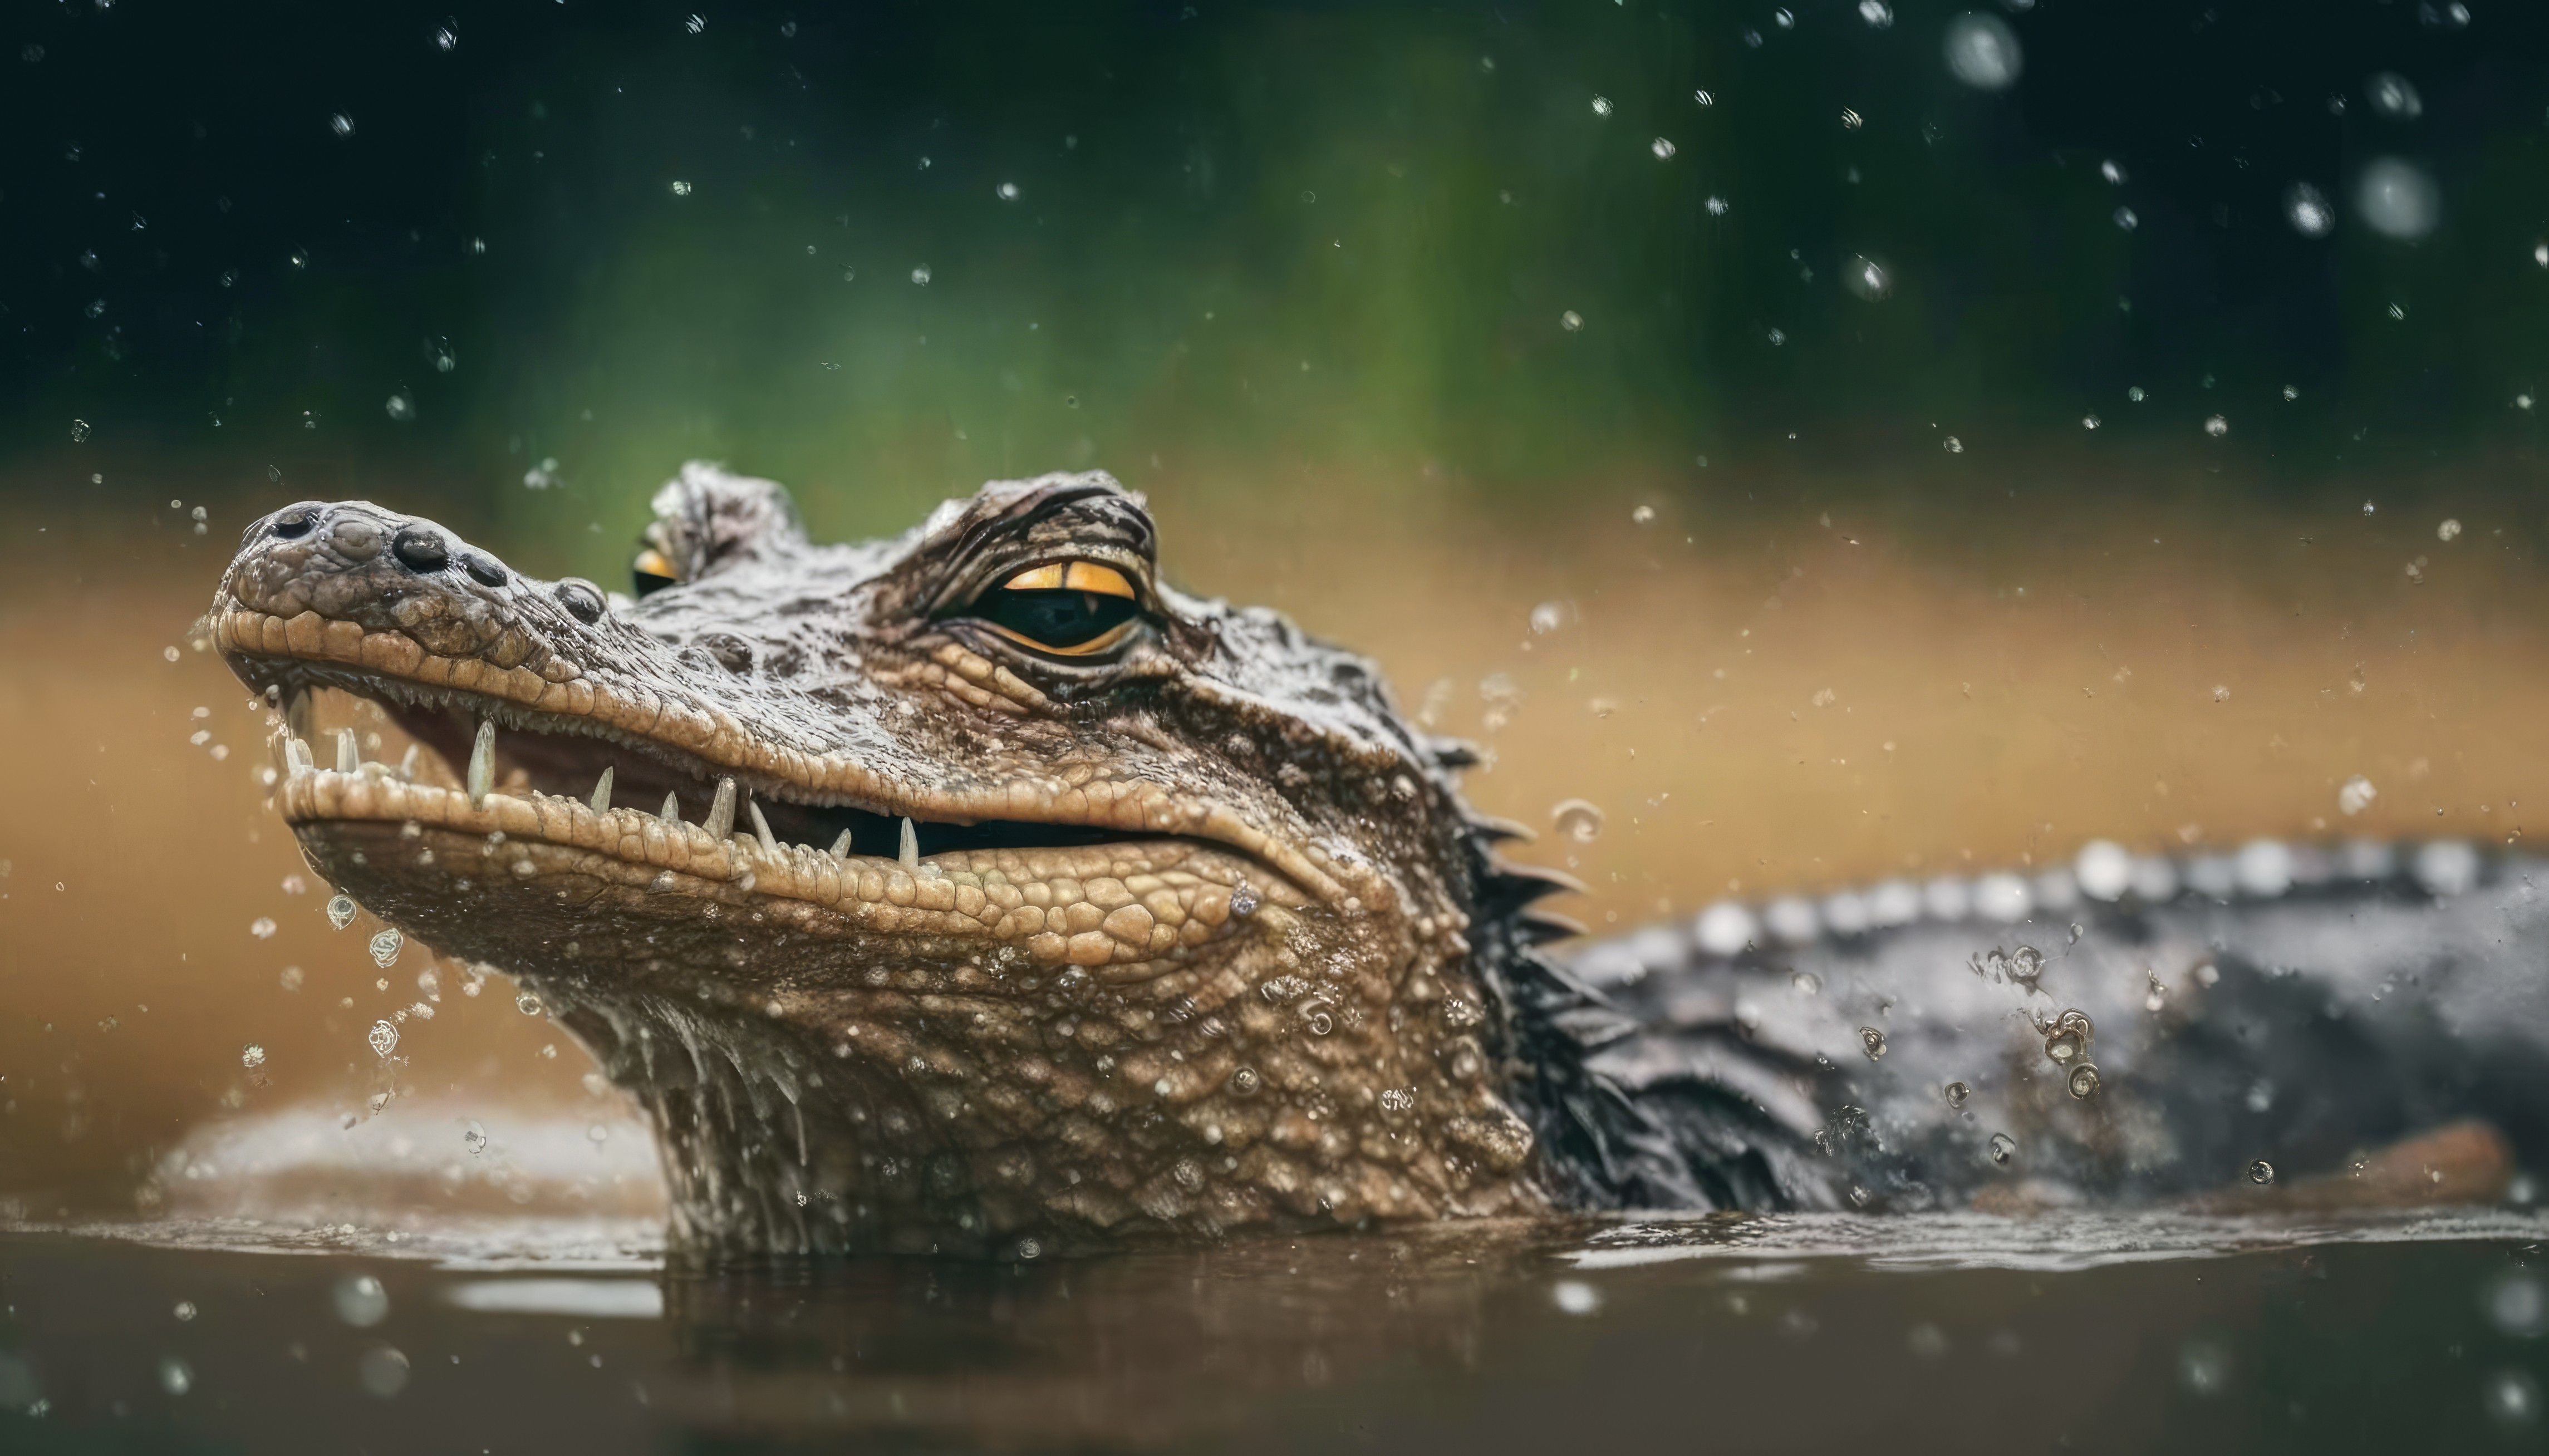 A crocodile of not large size emerged from the water